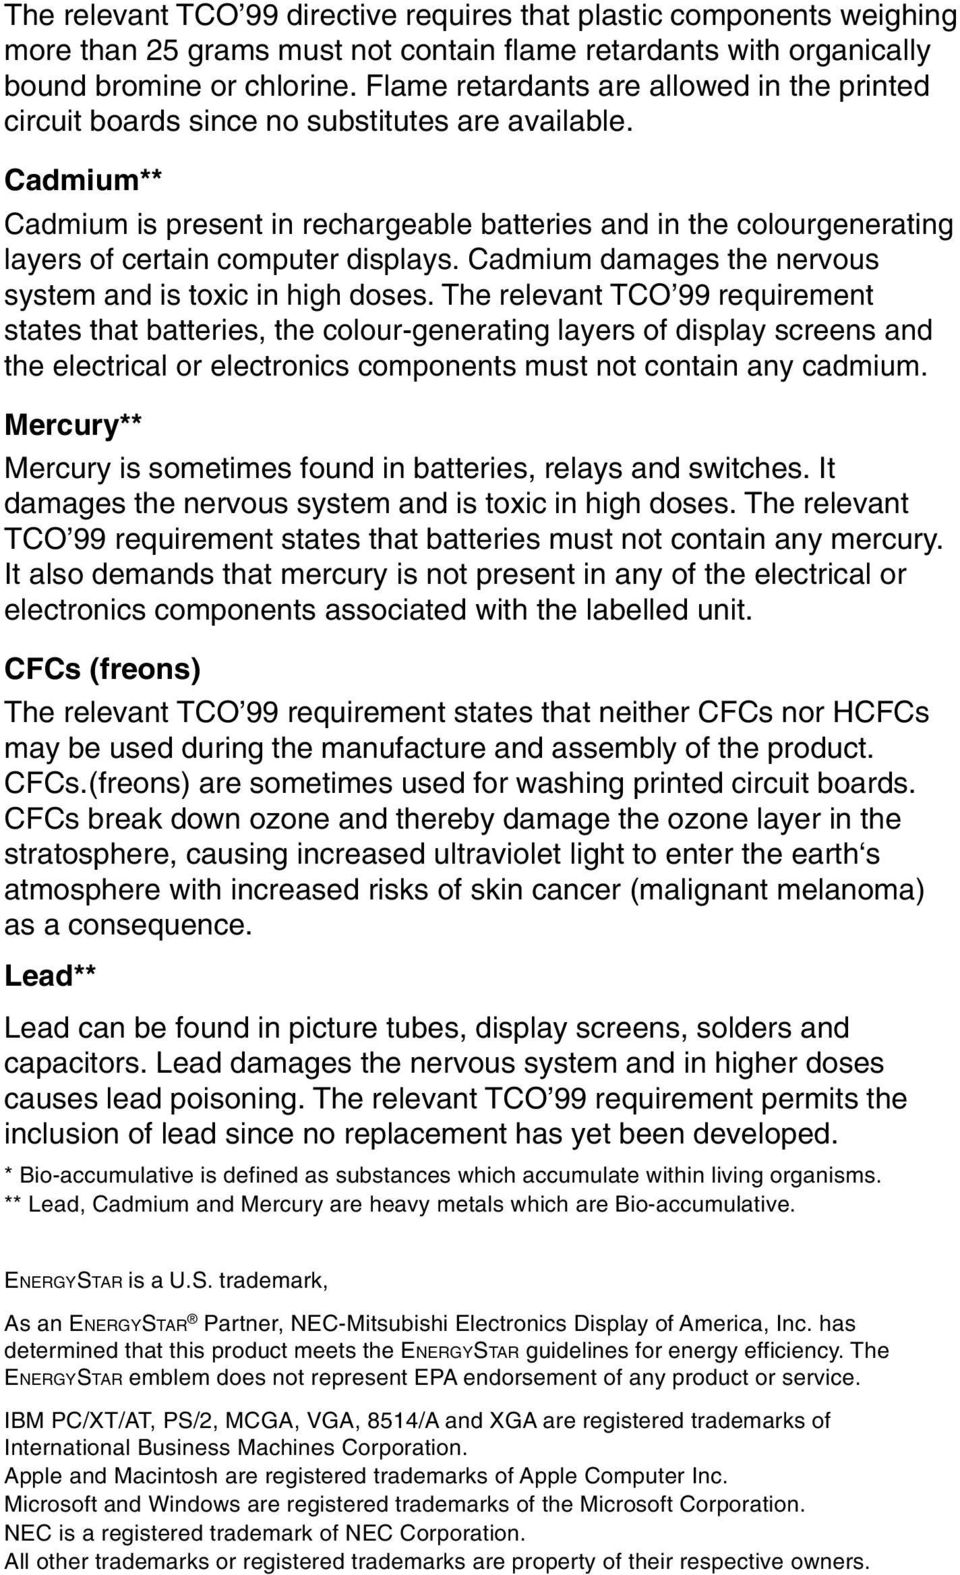 Cadmium** Cadmium is present in rechargeable batteries and in the colourgenerating layers of certain computer displays. Cadmium damages the nervous system and is toxic in high doses.